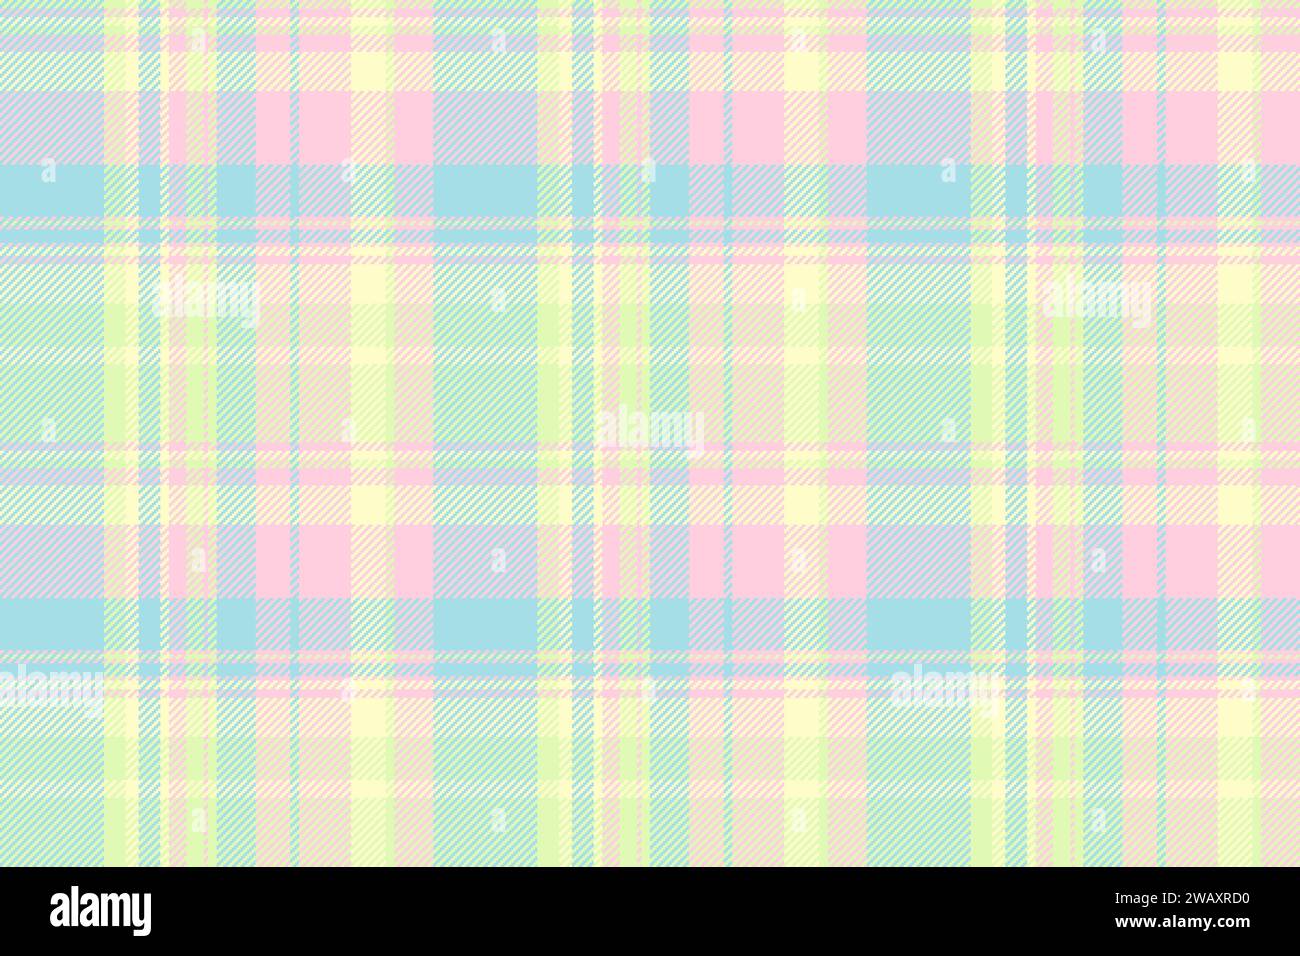 Background plaid pattern of texture textile fabric with a seamless check vector tartan in light and lemon chiffon colors. Stock Vector